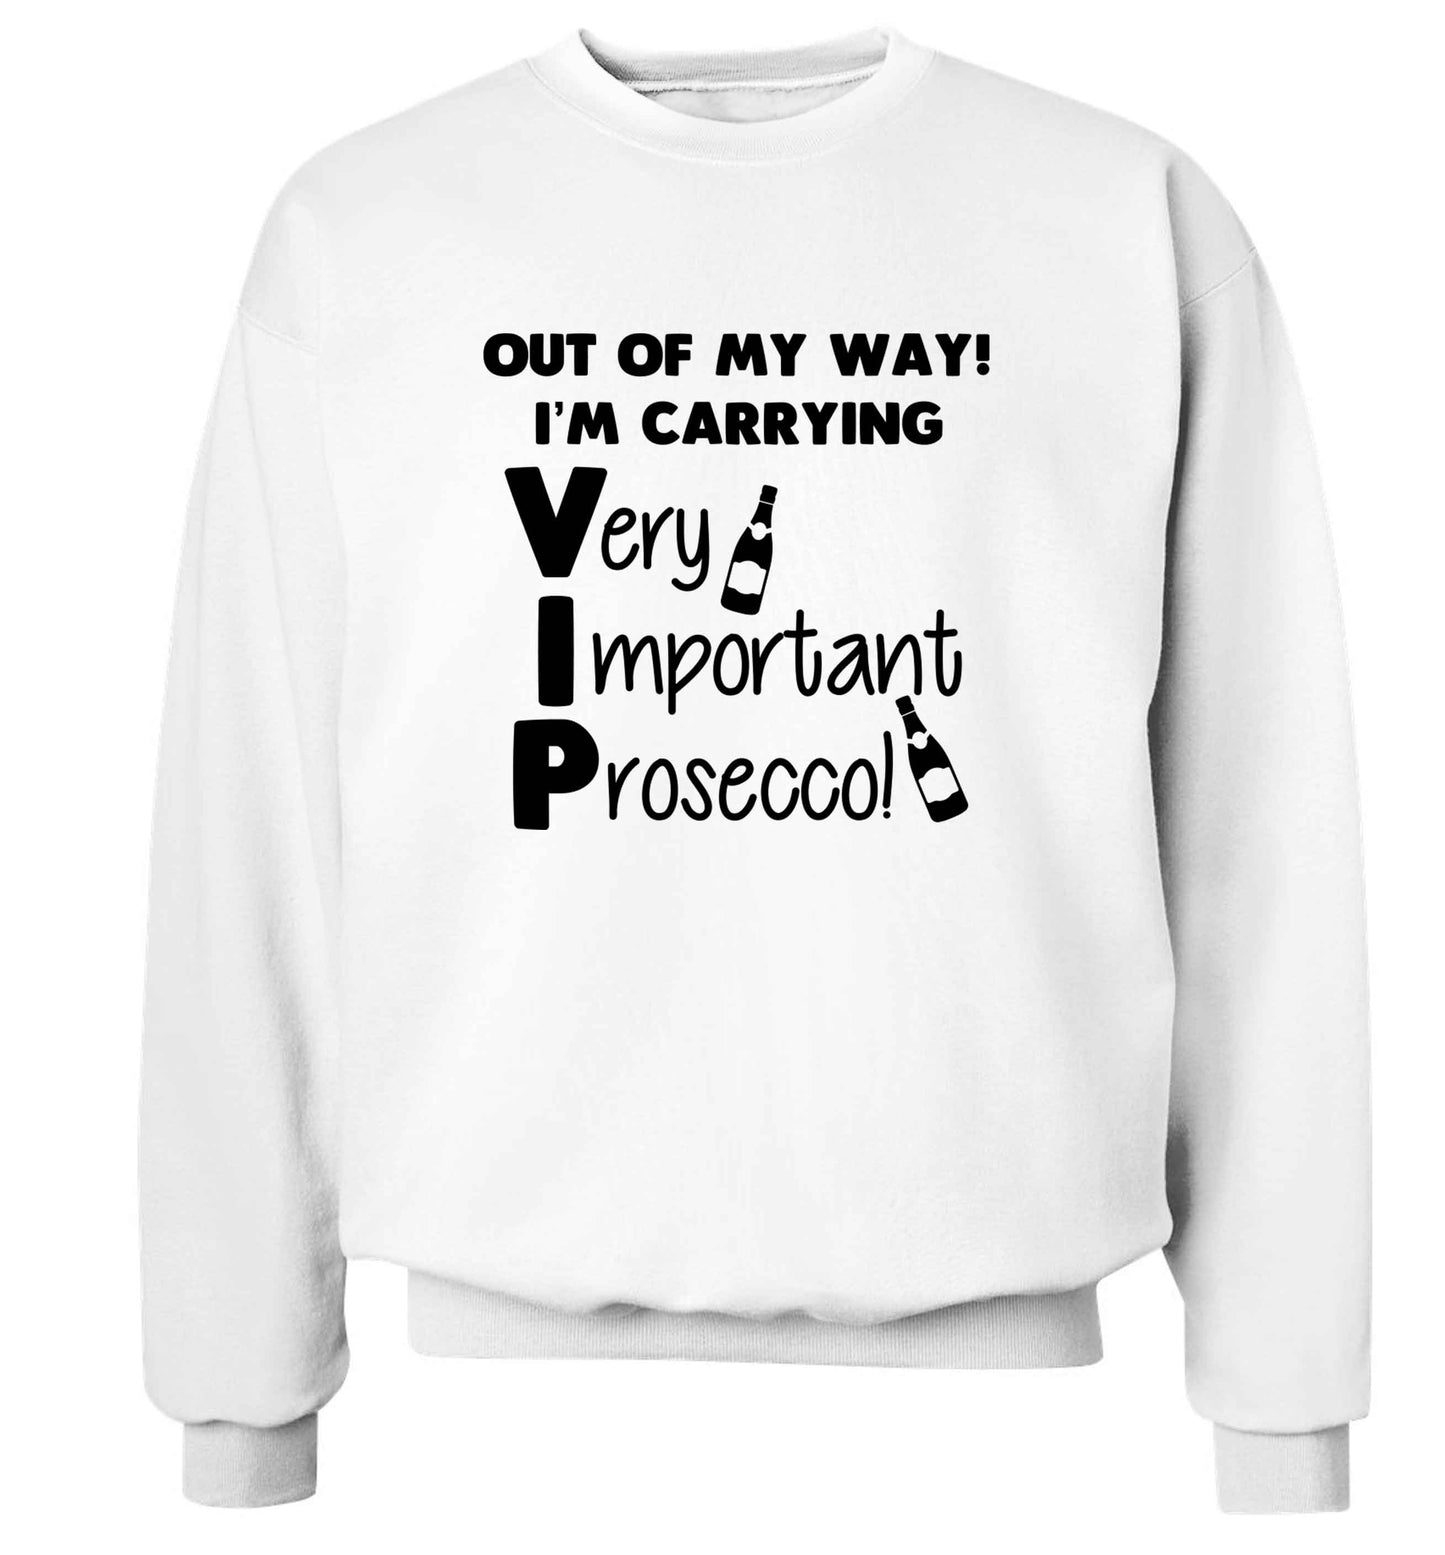 Out of my way I'm carrying very important prosecco! adult's unisex white sweater 2XL